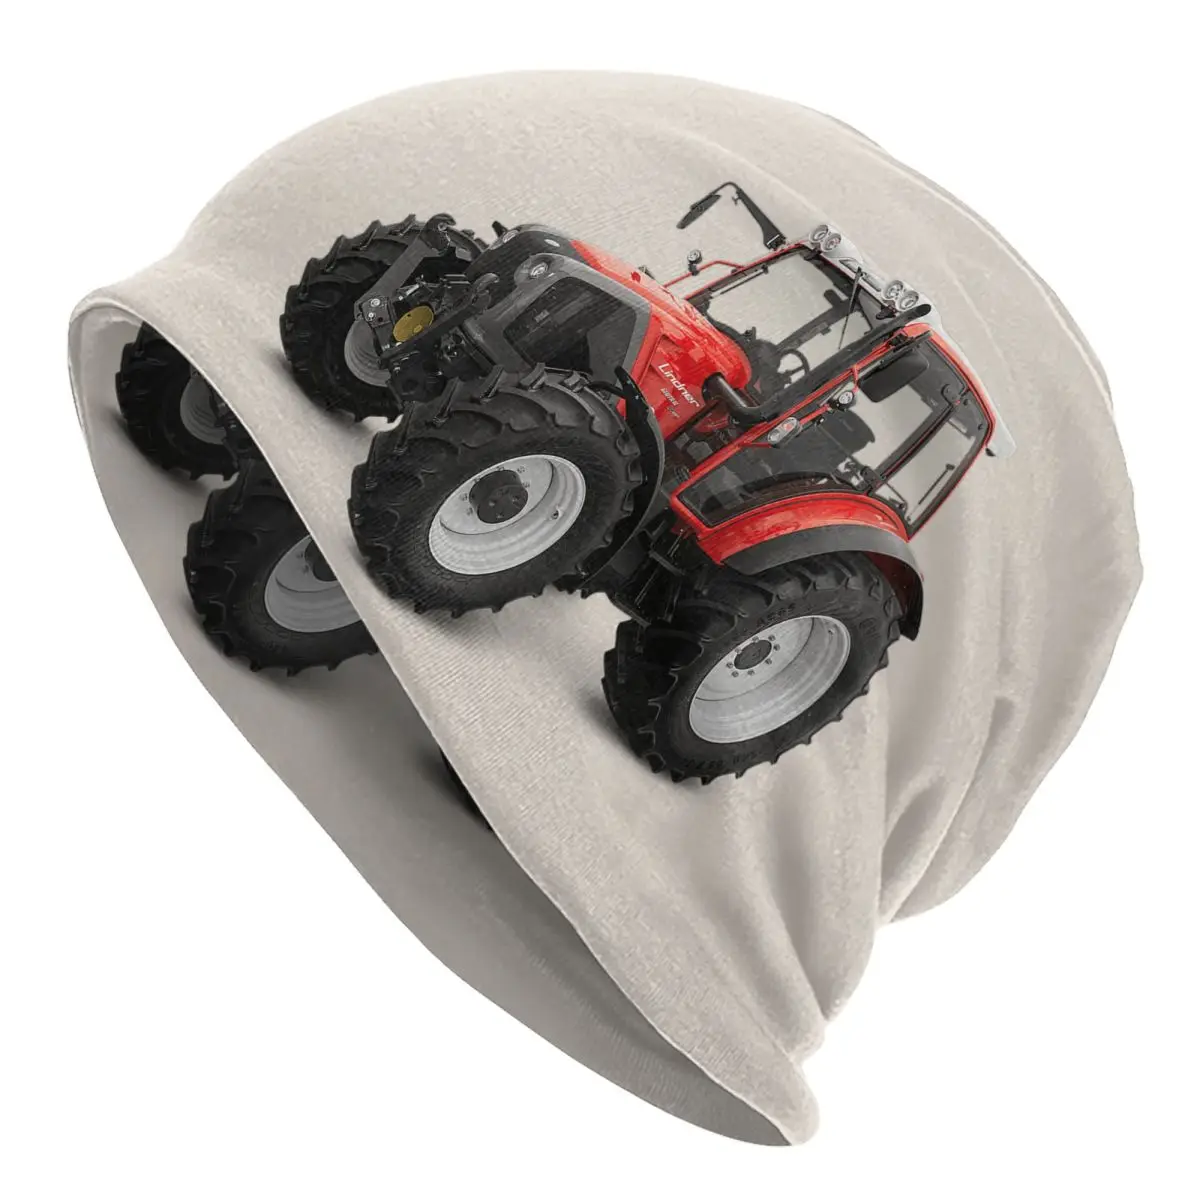 Tractor Adult Men's Women's Knit Hat Keep warm winter Funny knitted hat